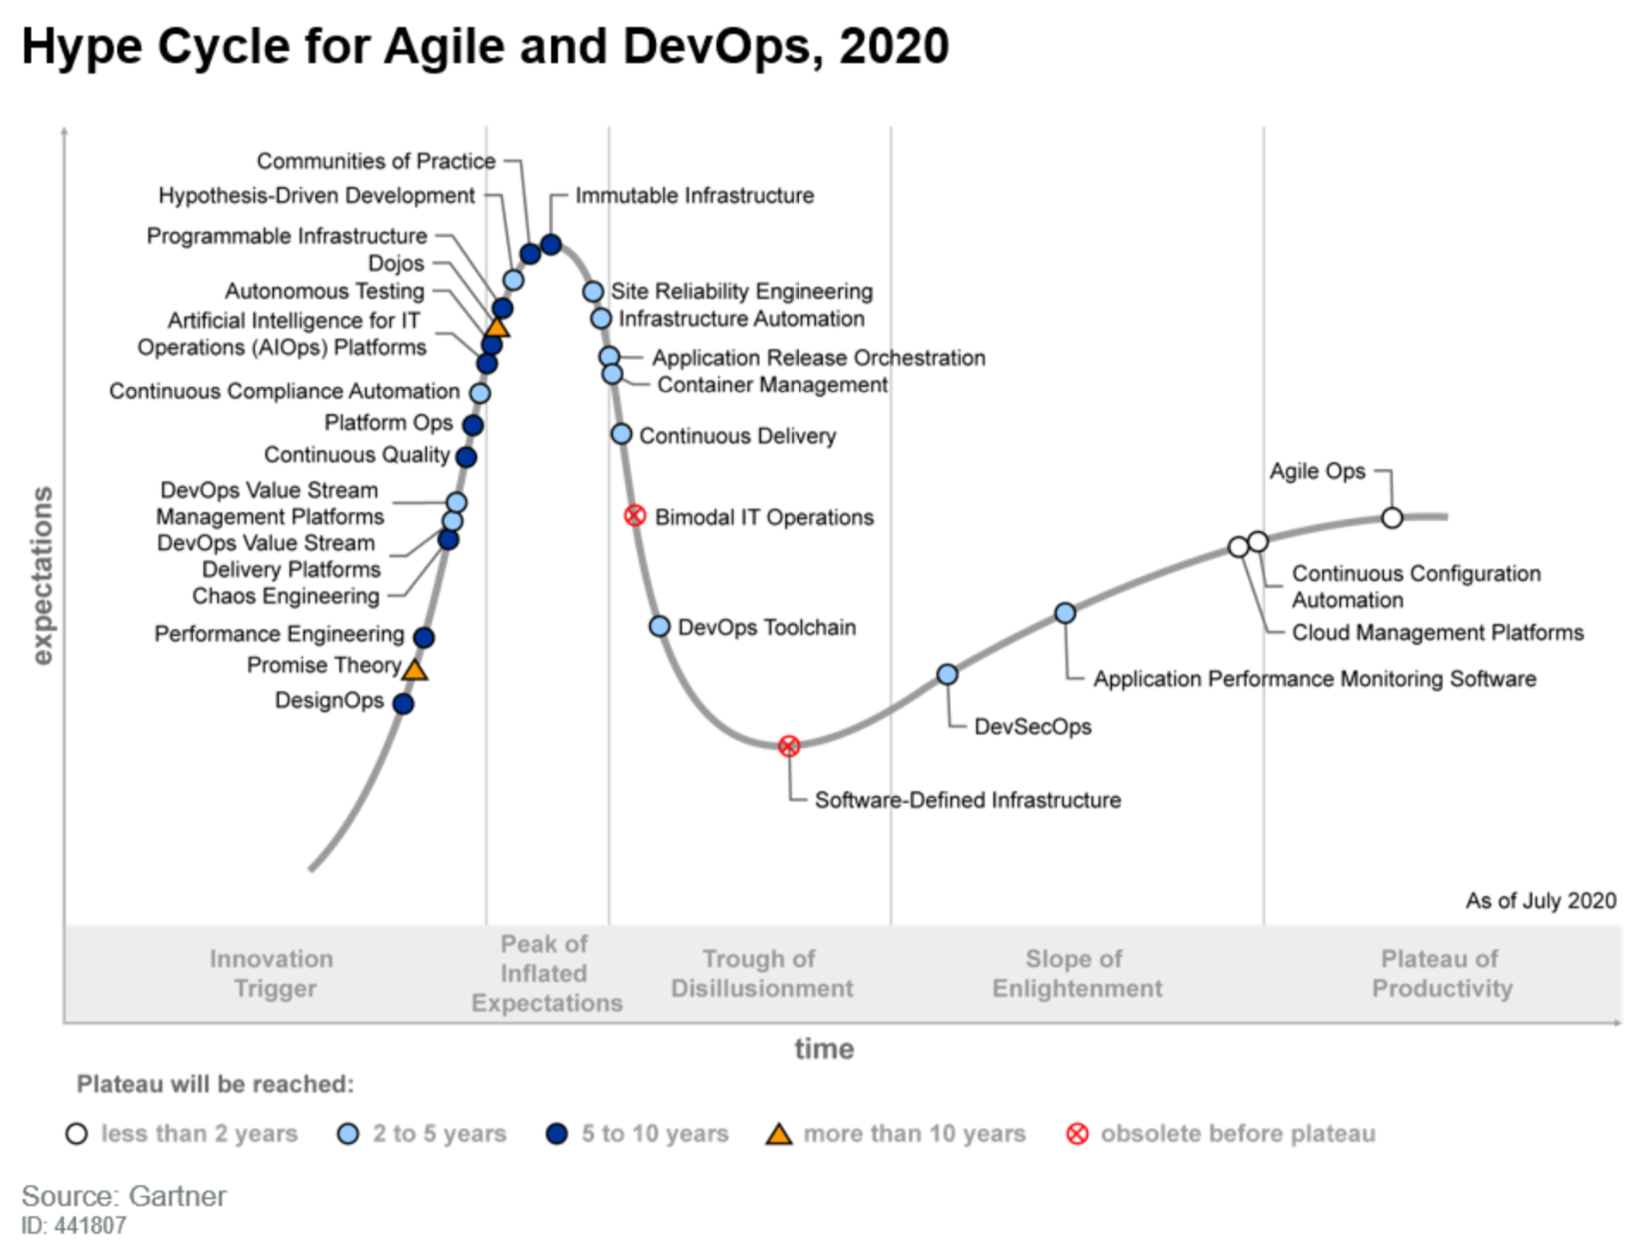 Gartner mentions StackState in 2020 DevOps Hype Cycle - StackState